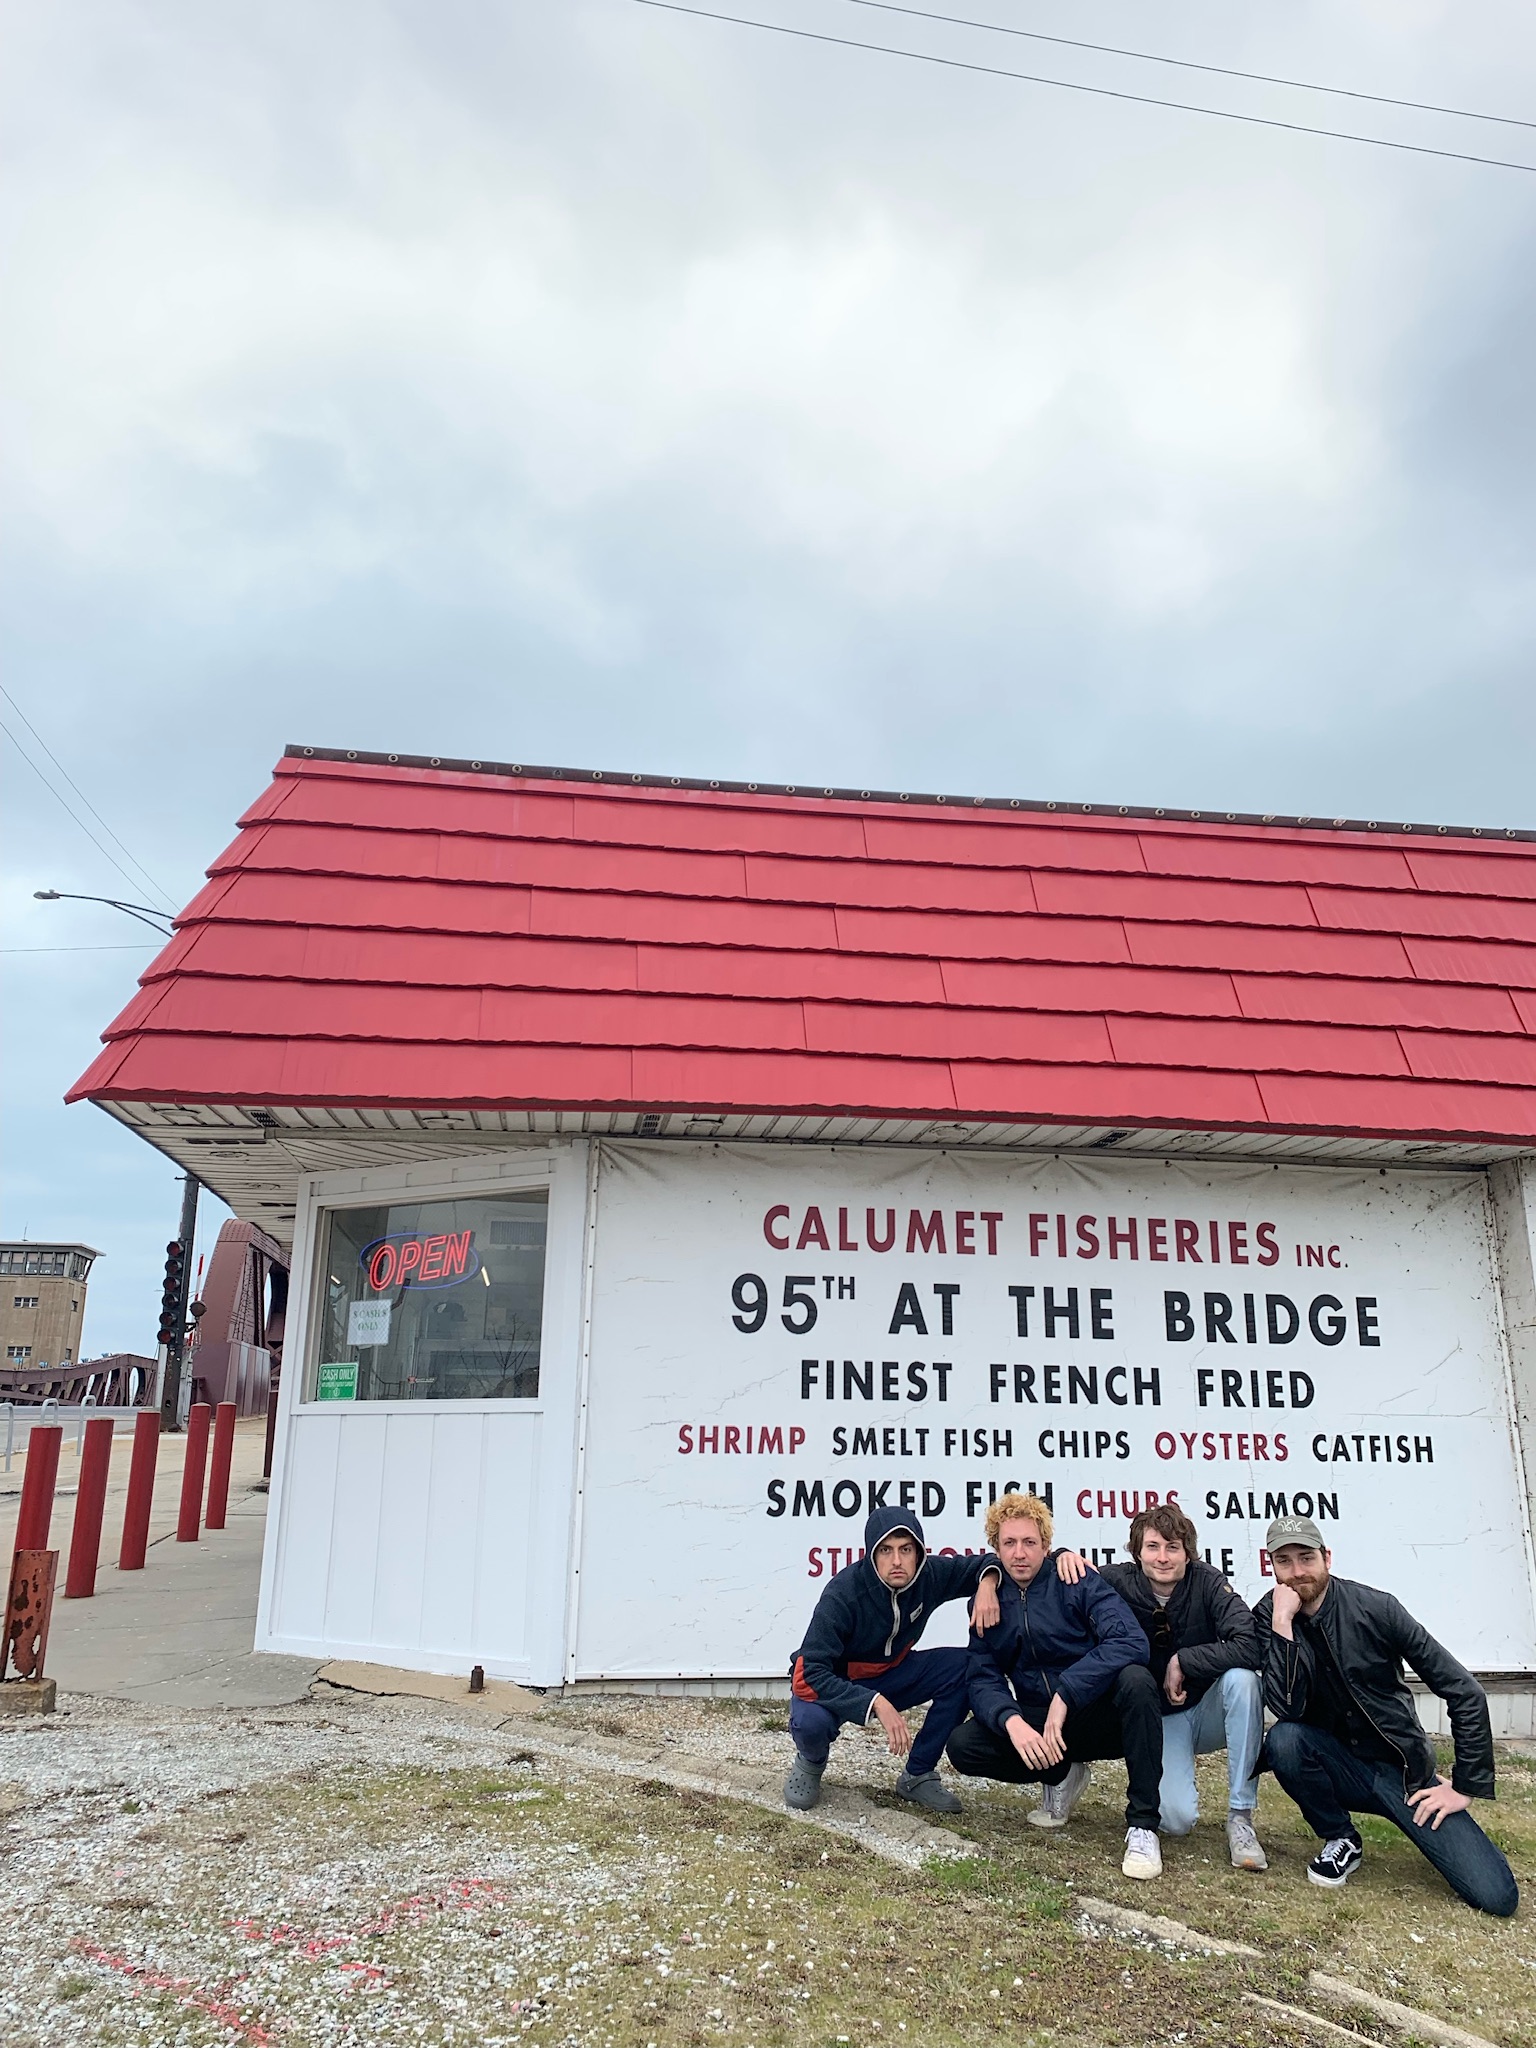 Lane Beckstrom, Liam Kazar, me, and Dorian Gehring posing in front of Calumet Fisheries in Chicago. Photo by Jack Henry.